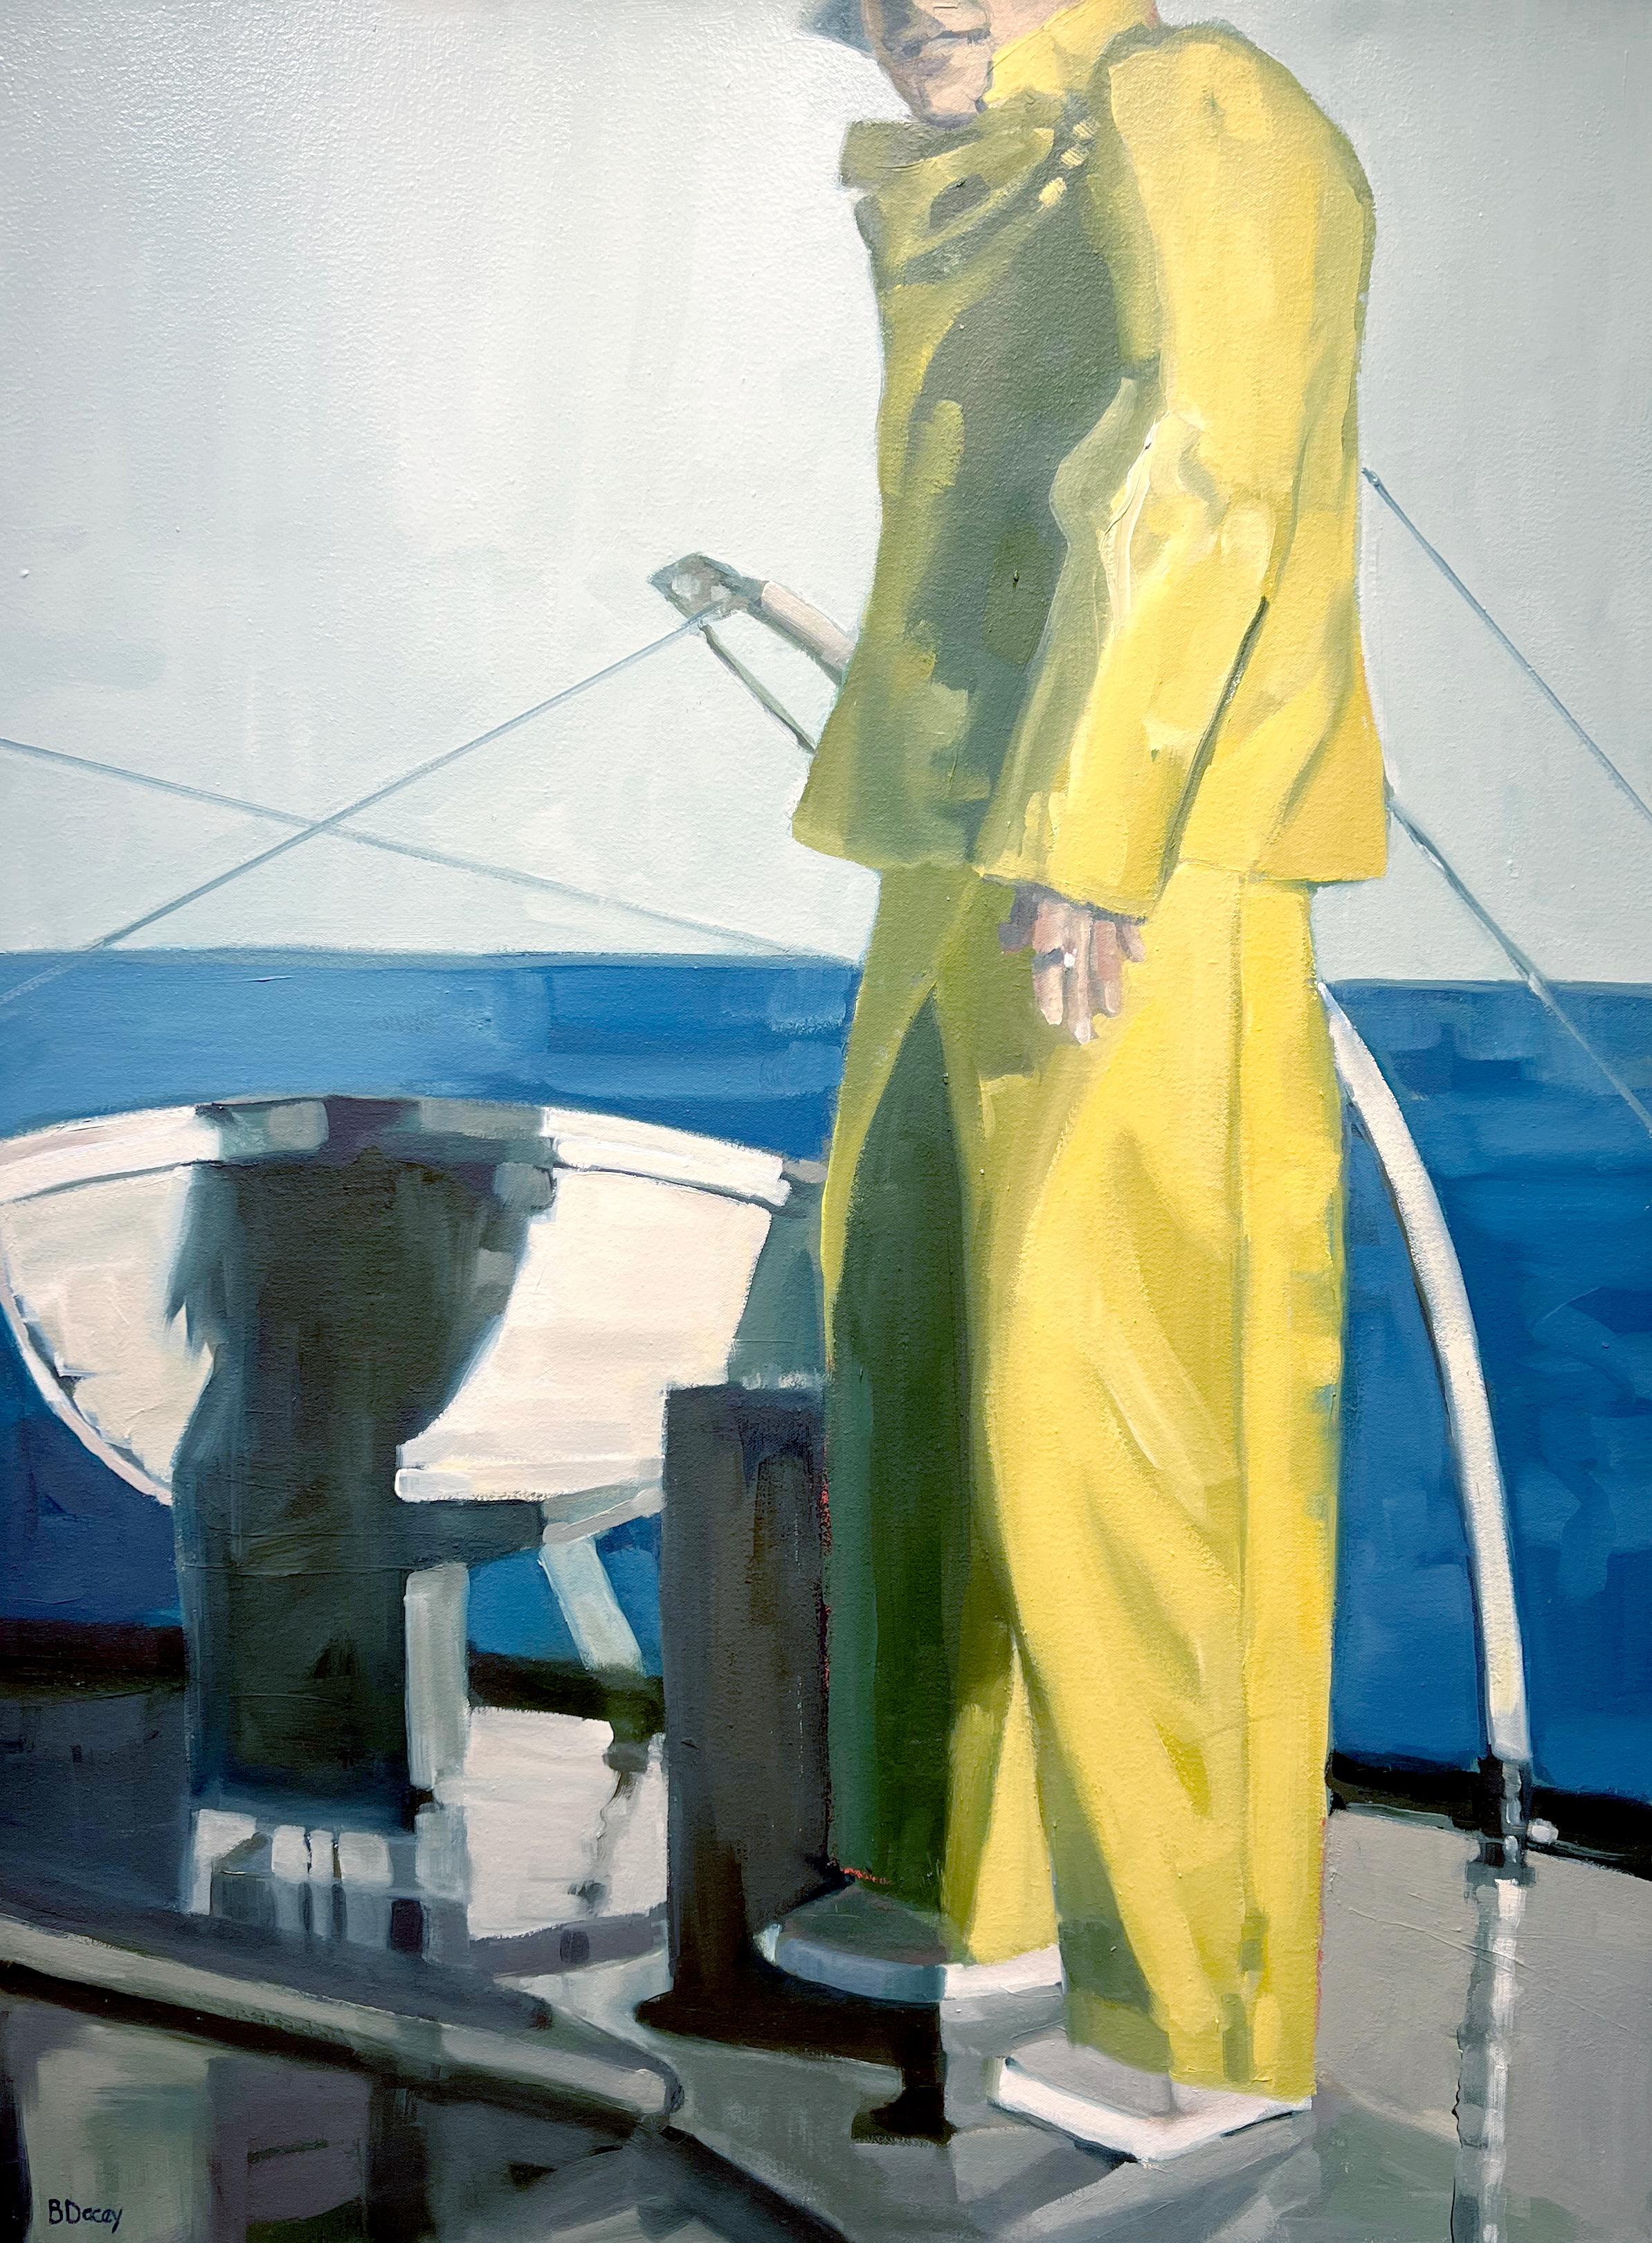 This piece, "Sailor in Yellow Gear", is a 40x30 oil painting on canvas by artist Beth Dacey. Featured is a man in yellow sailor gear standing on the side of the boat looking back towards the viewer, his tall shadow cast from the evening light. In